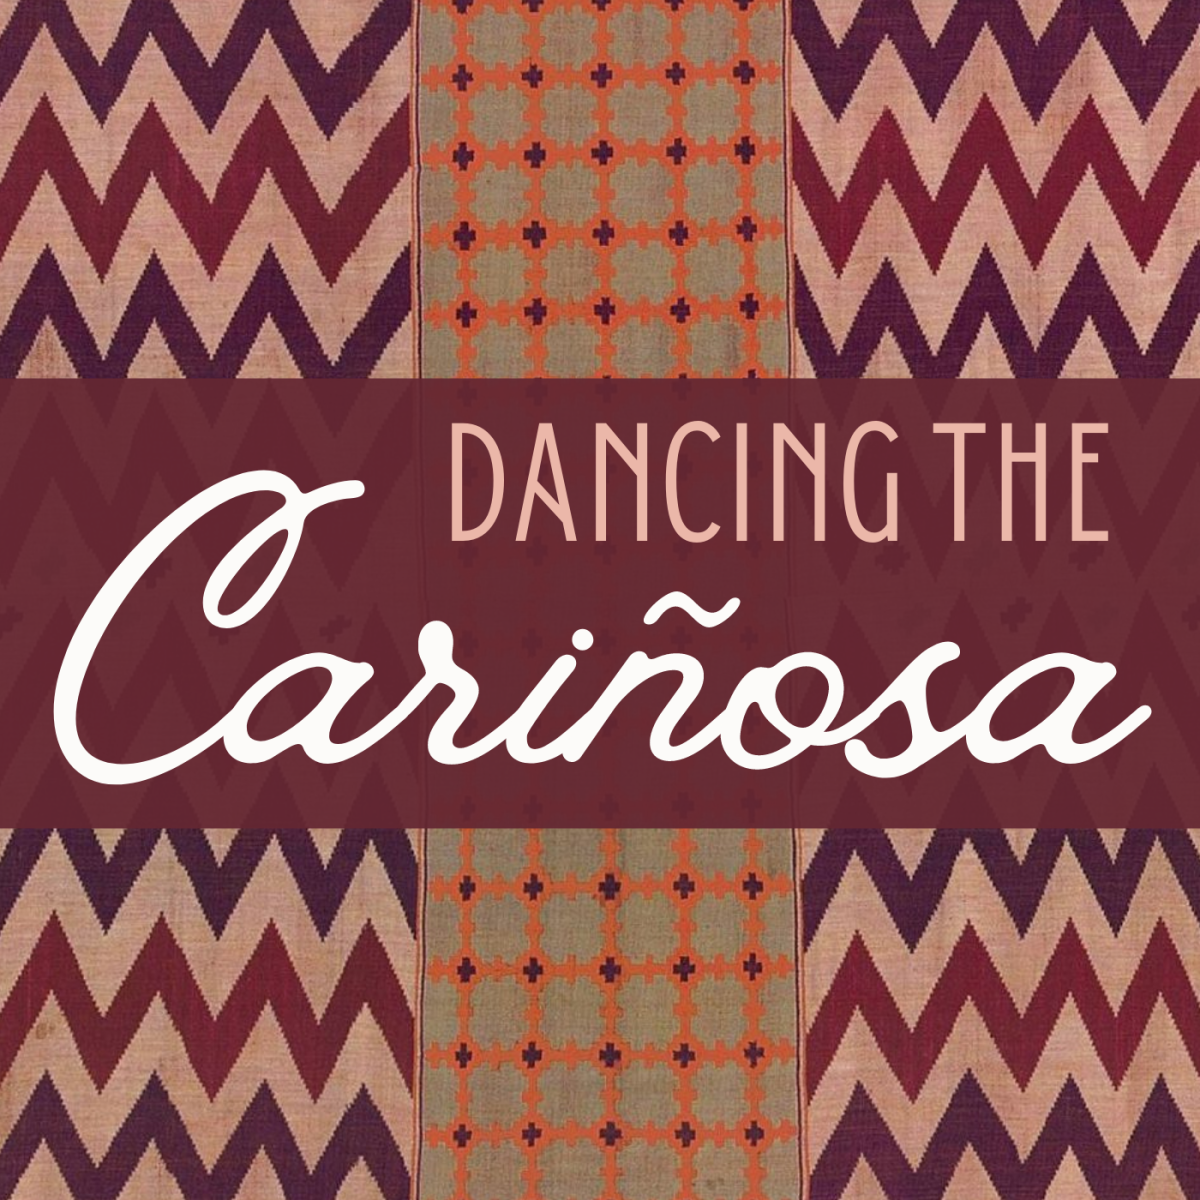 Learn about the famous Filipino folk dance called the cariñosa, which is danced while wearing a beautiful patadyong like this one. Follow along with the steps to this beloved dance!